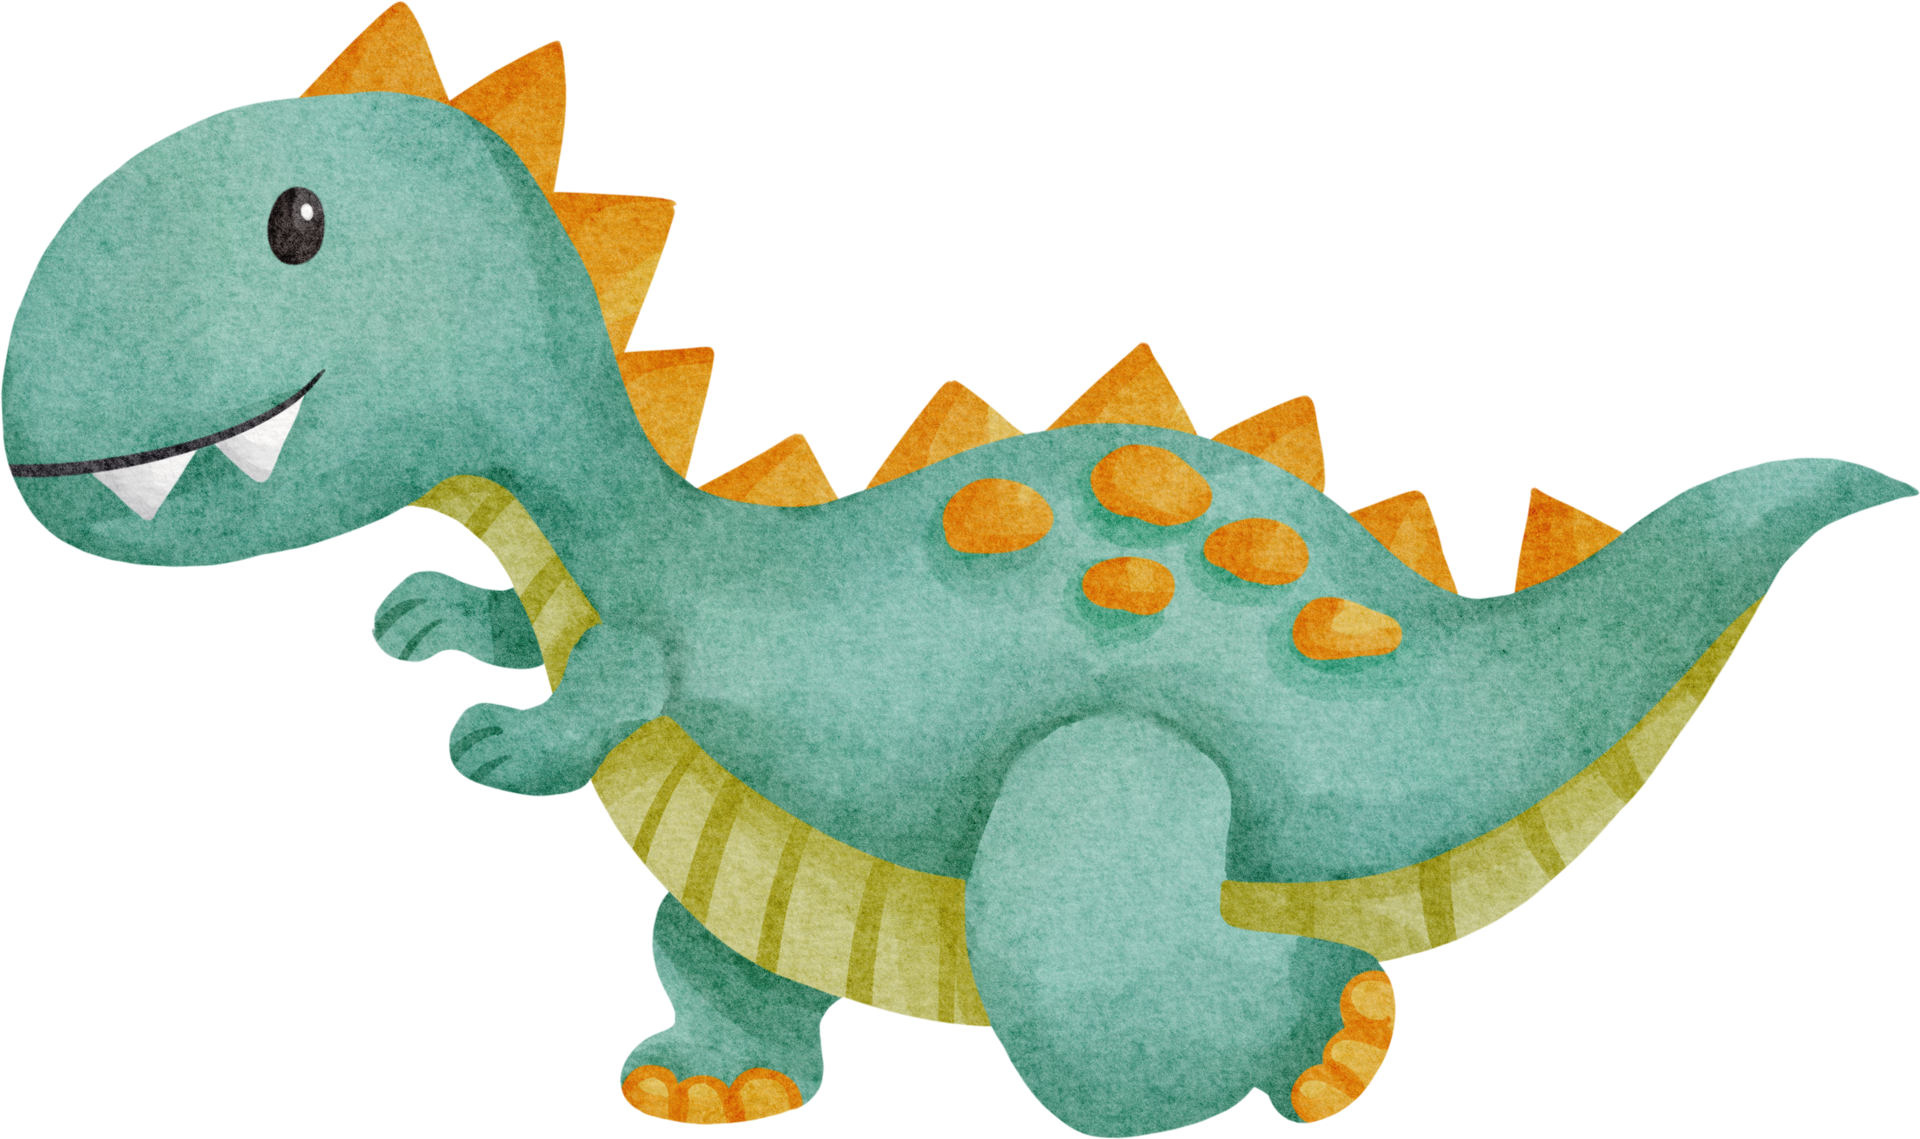 Dinosaur png images